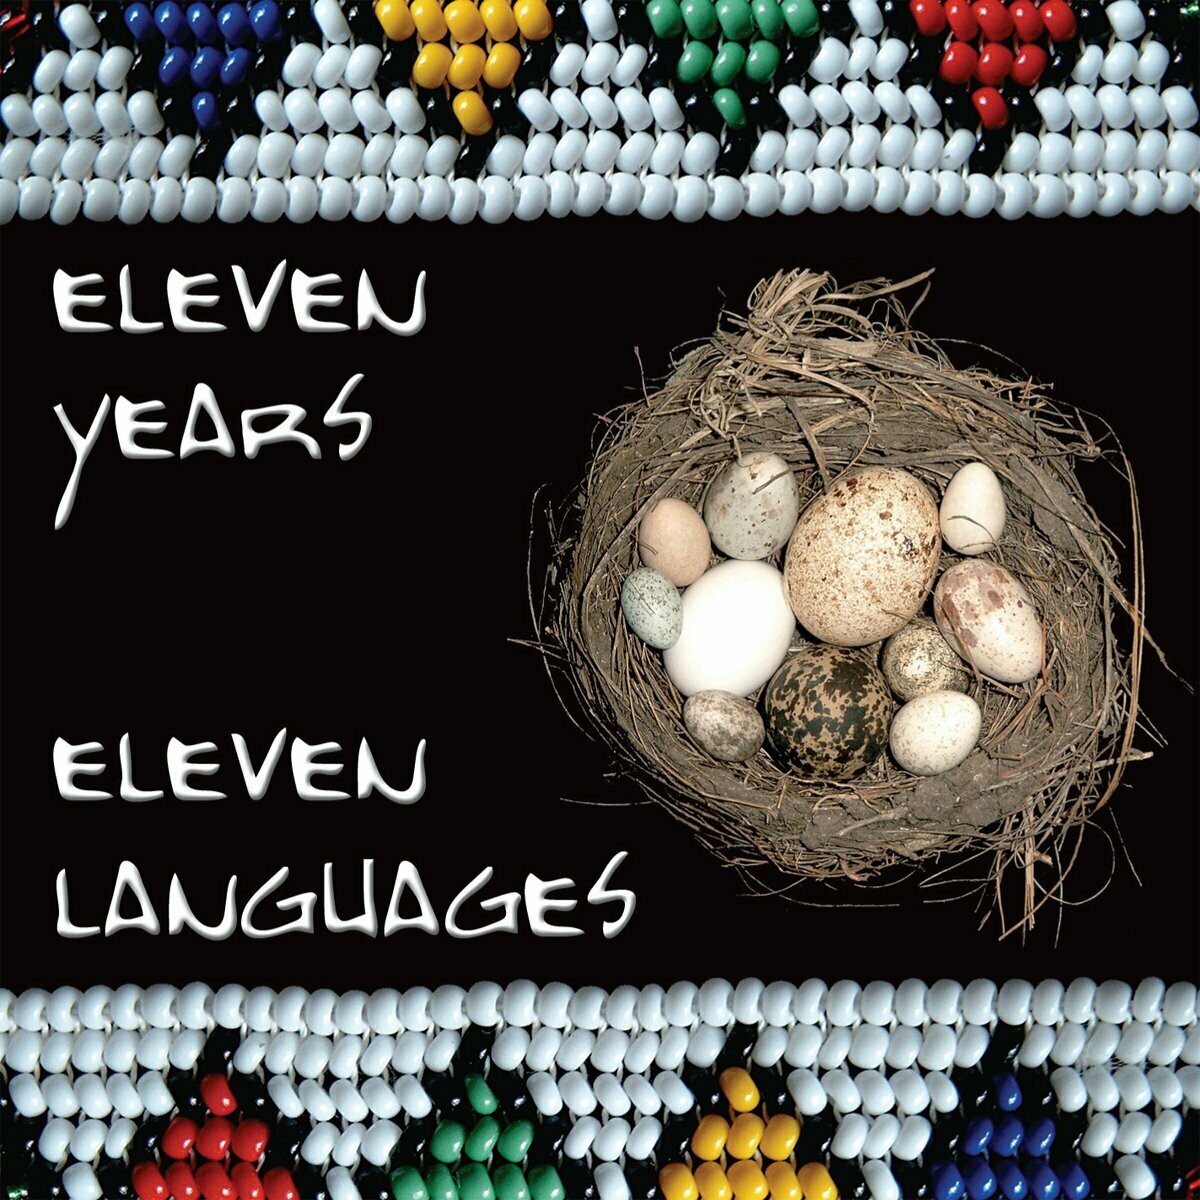 Eleven Years - Eleven Languages - South African Choral Music III | CD